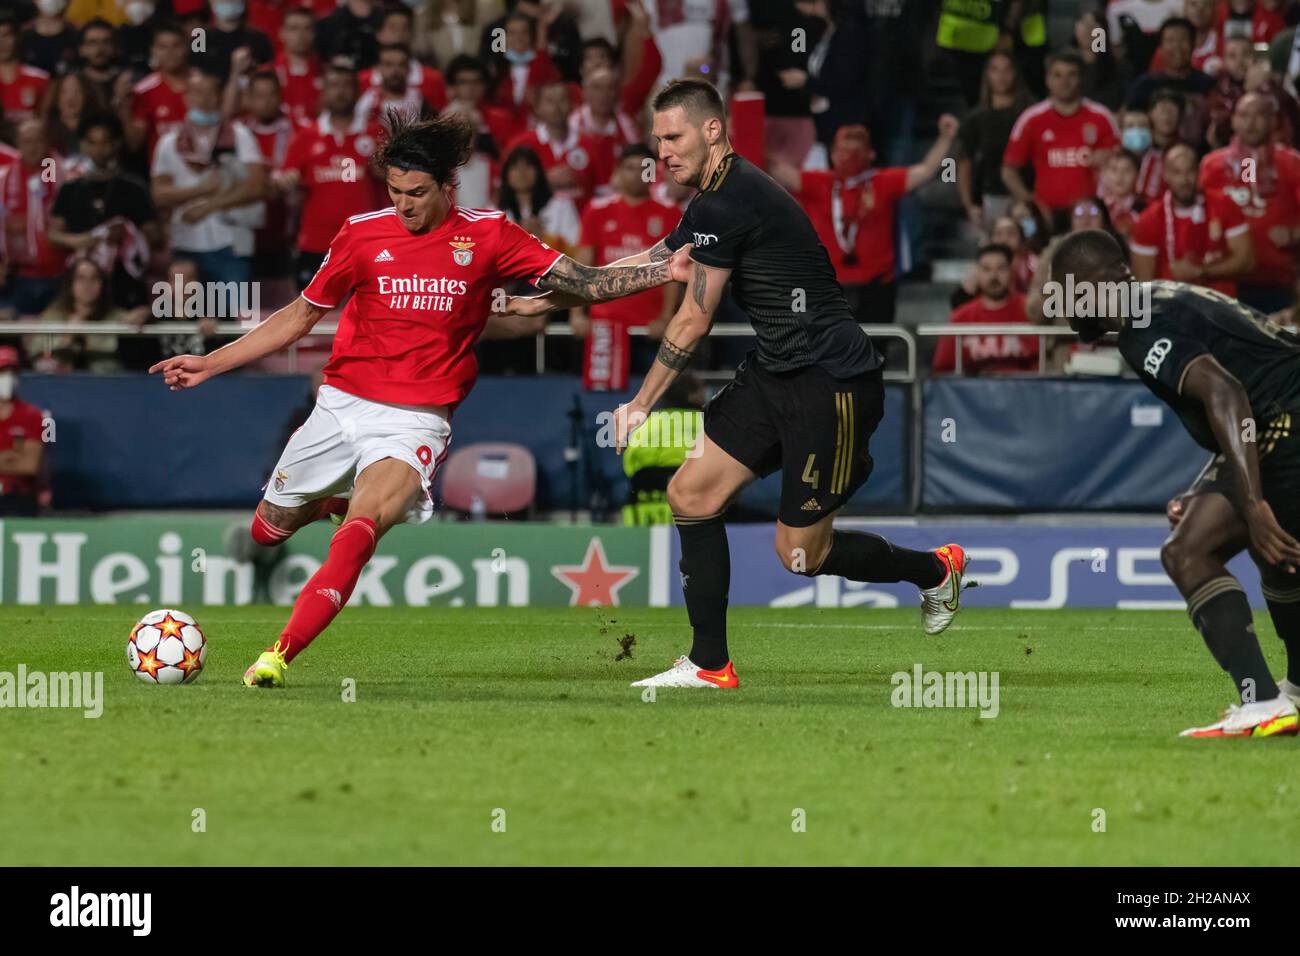 Lisbon, Portugal. 20th Oct, 2021. Darwin Nunez of SL Benfica (left) and Niklas Sule (center) of FC Bayern Munich in action during the UEFA Champions League match between SL Benfica and FC Bayern Munich at Estadio da Luz stadium.Final score; SL Benfica 0:4 FC Bayern Munich. Credit: SOPA Images Limited/Alamy Live News Stock Photo